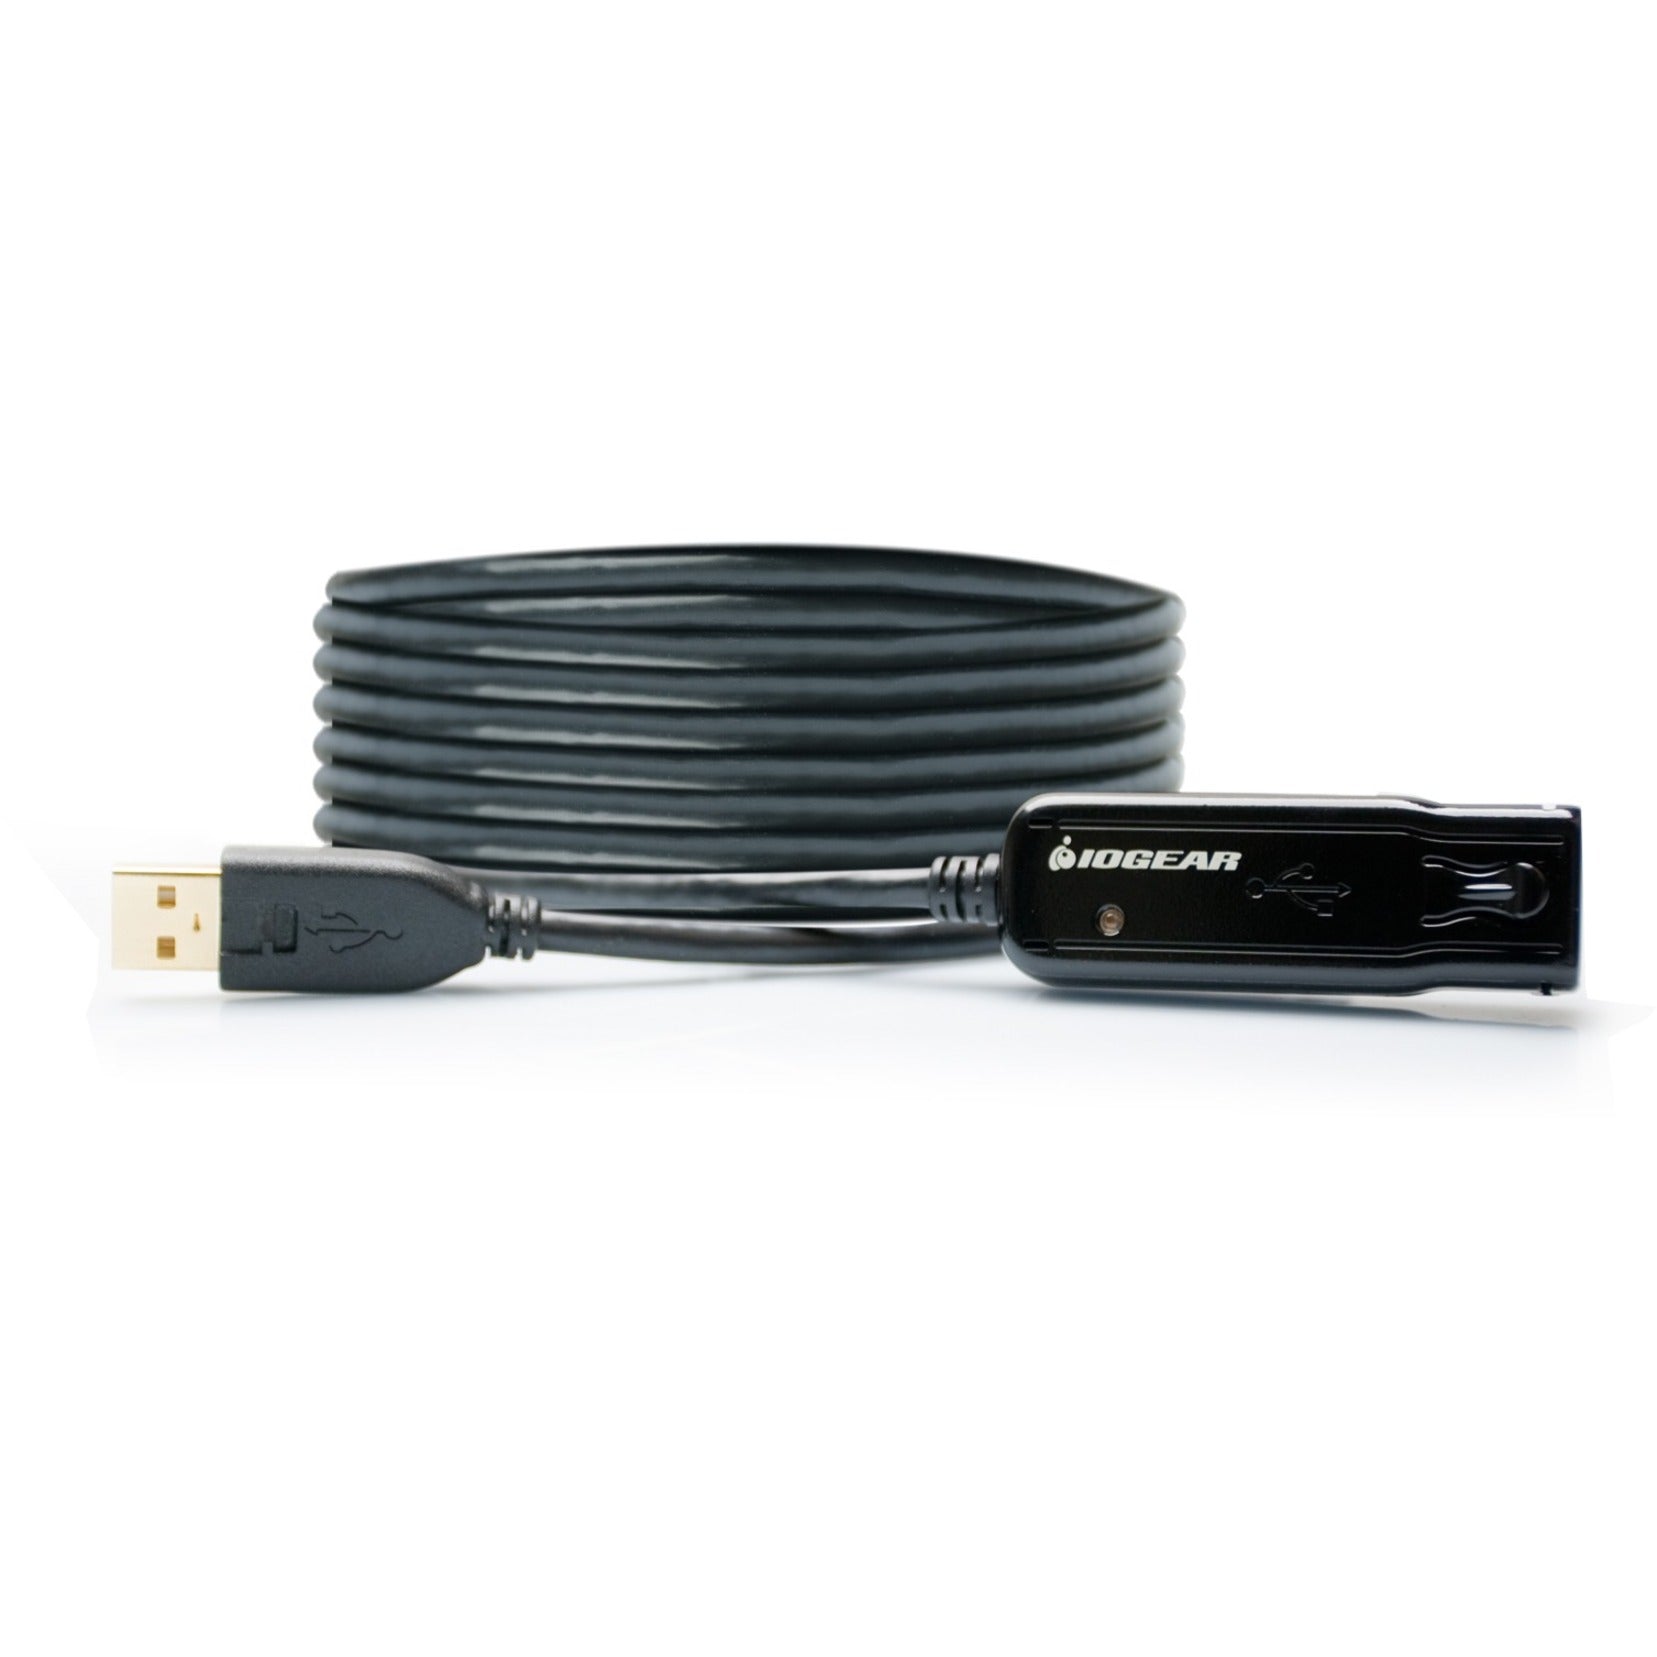 IOGEAR GUE2118 USB 2.0 Booster Extension Cable - 39ft, Data Transfer Cable, 480 Mbit/s